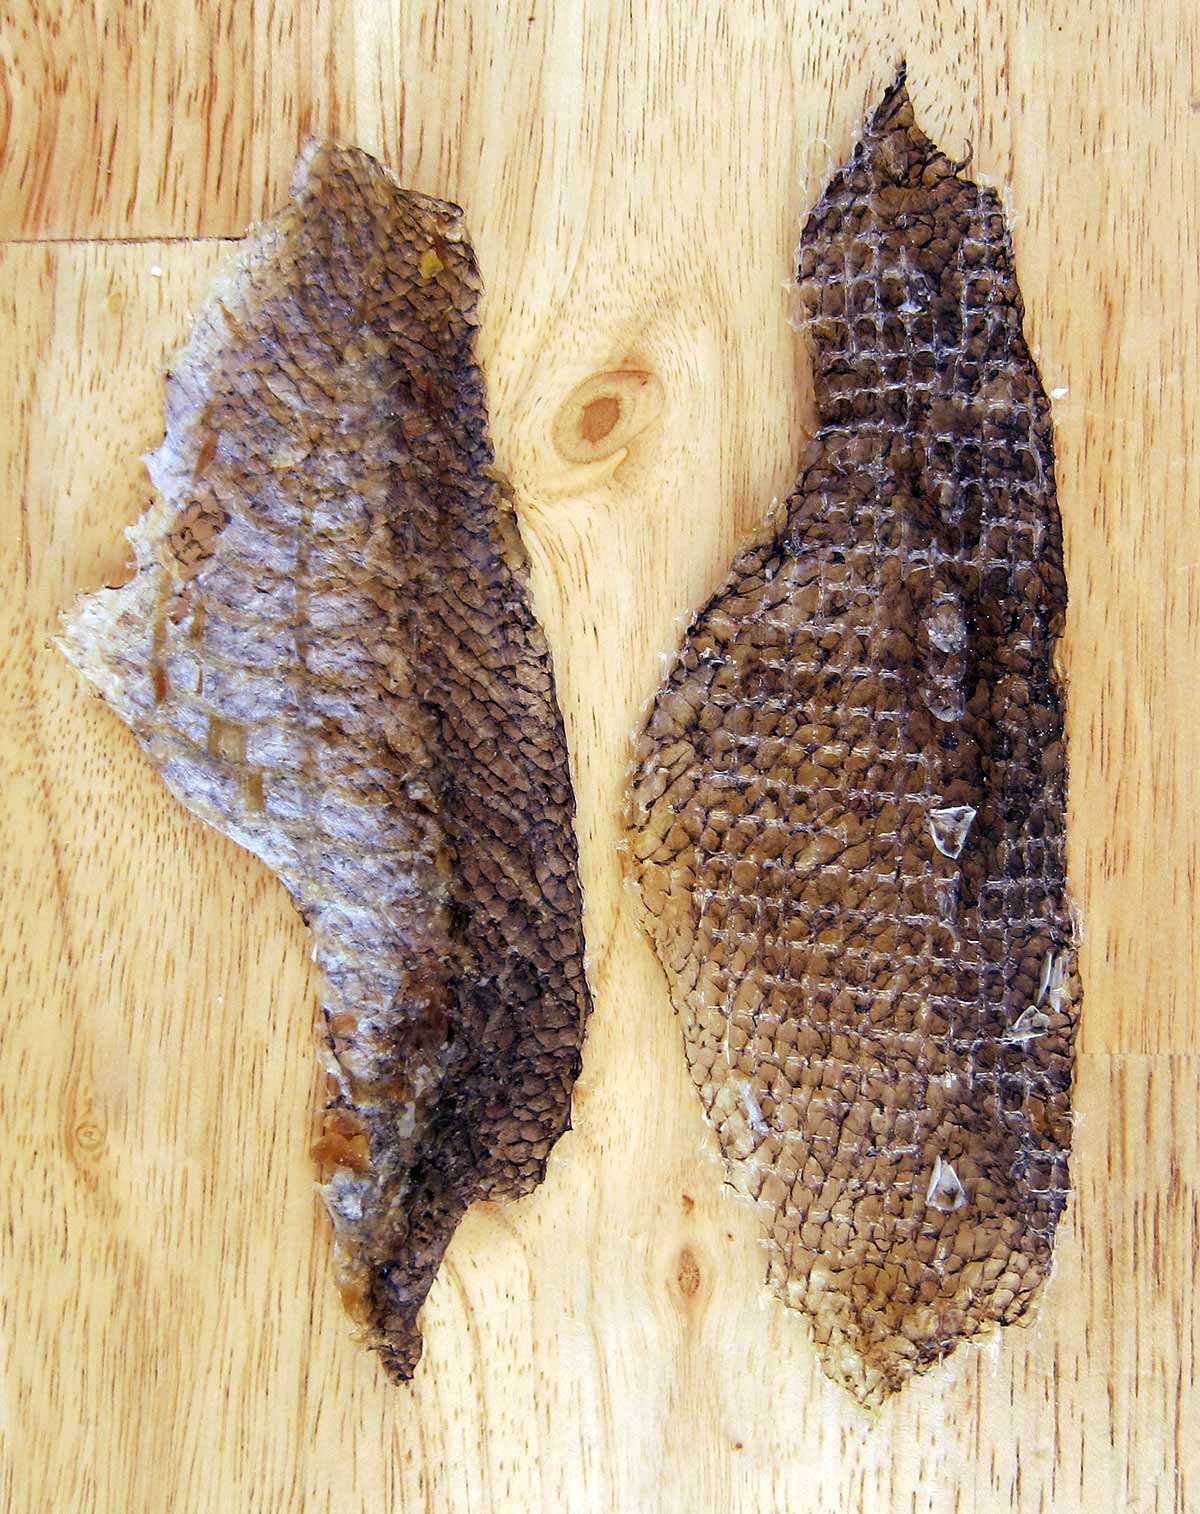 Dried fish skins, ready to be fried